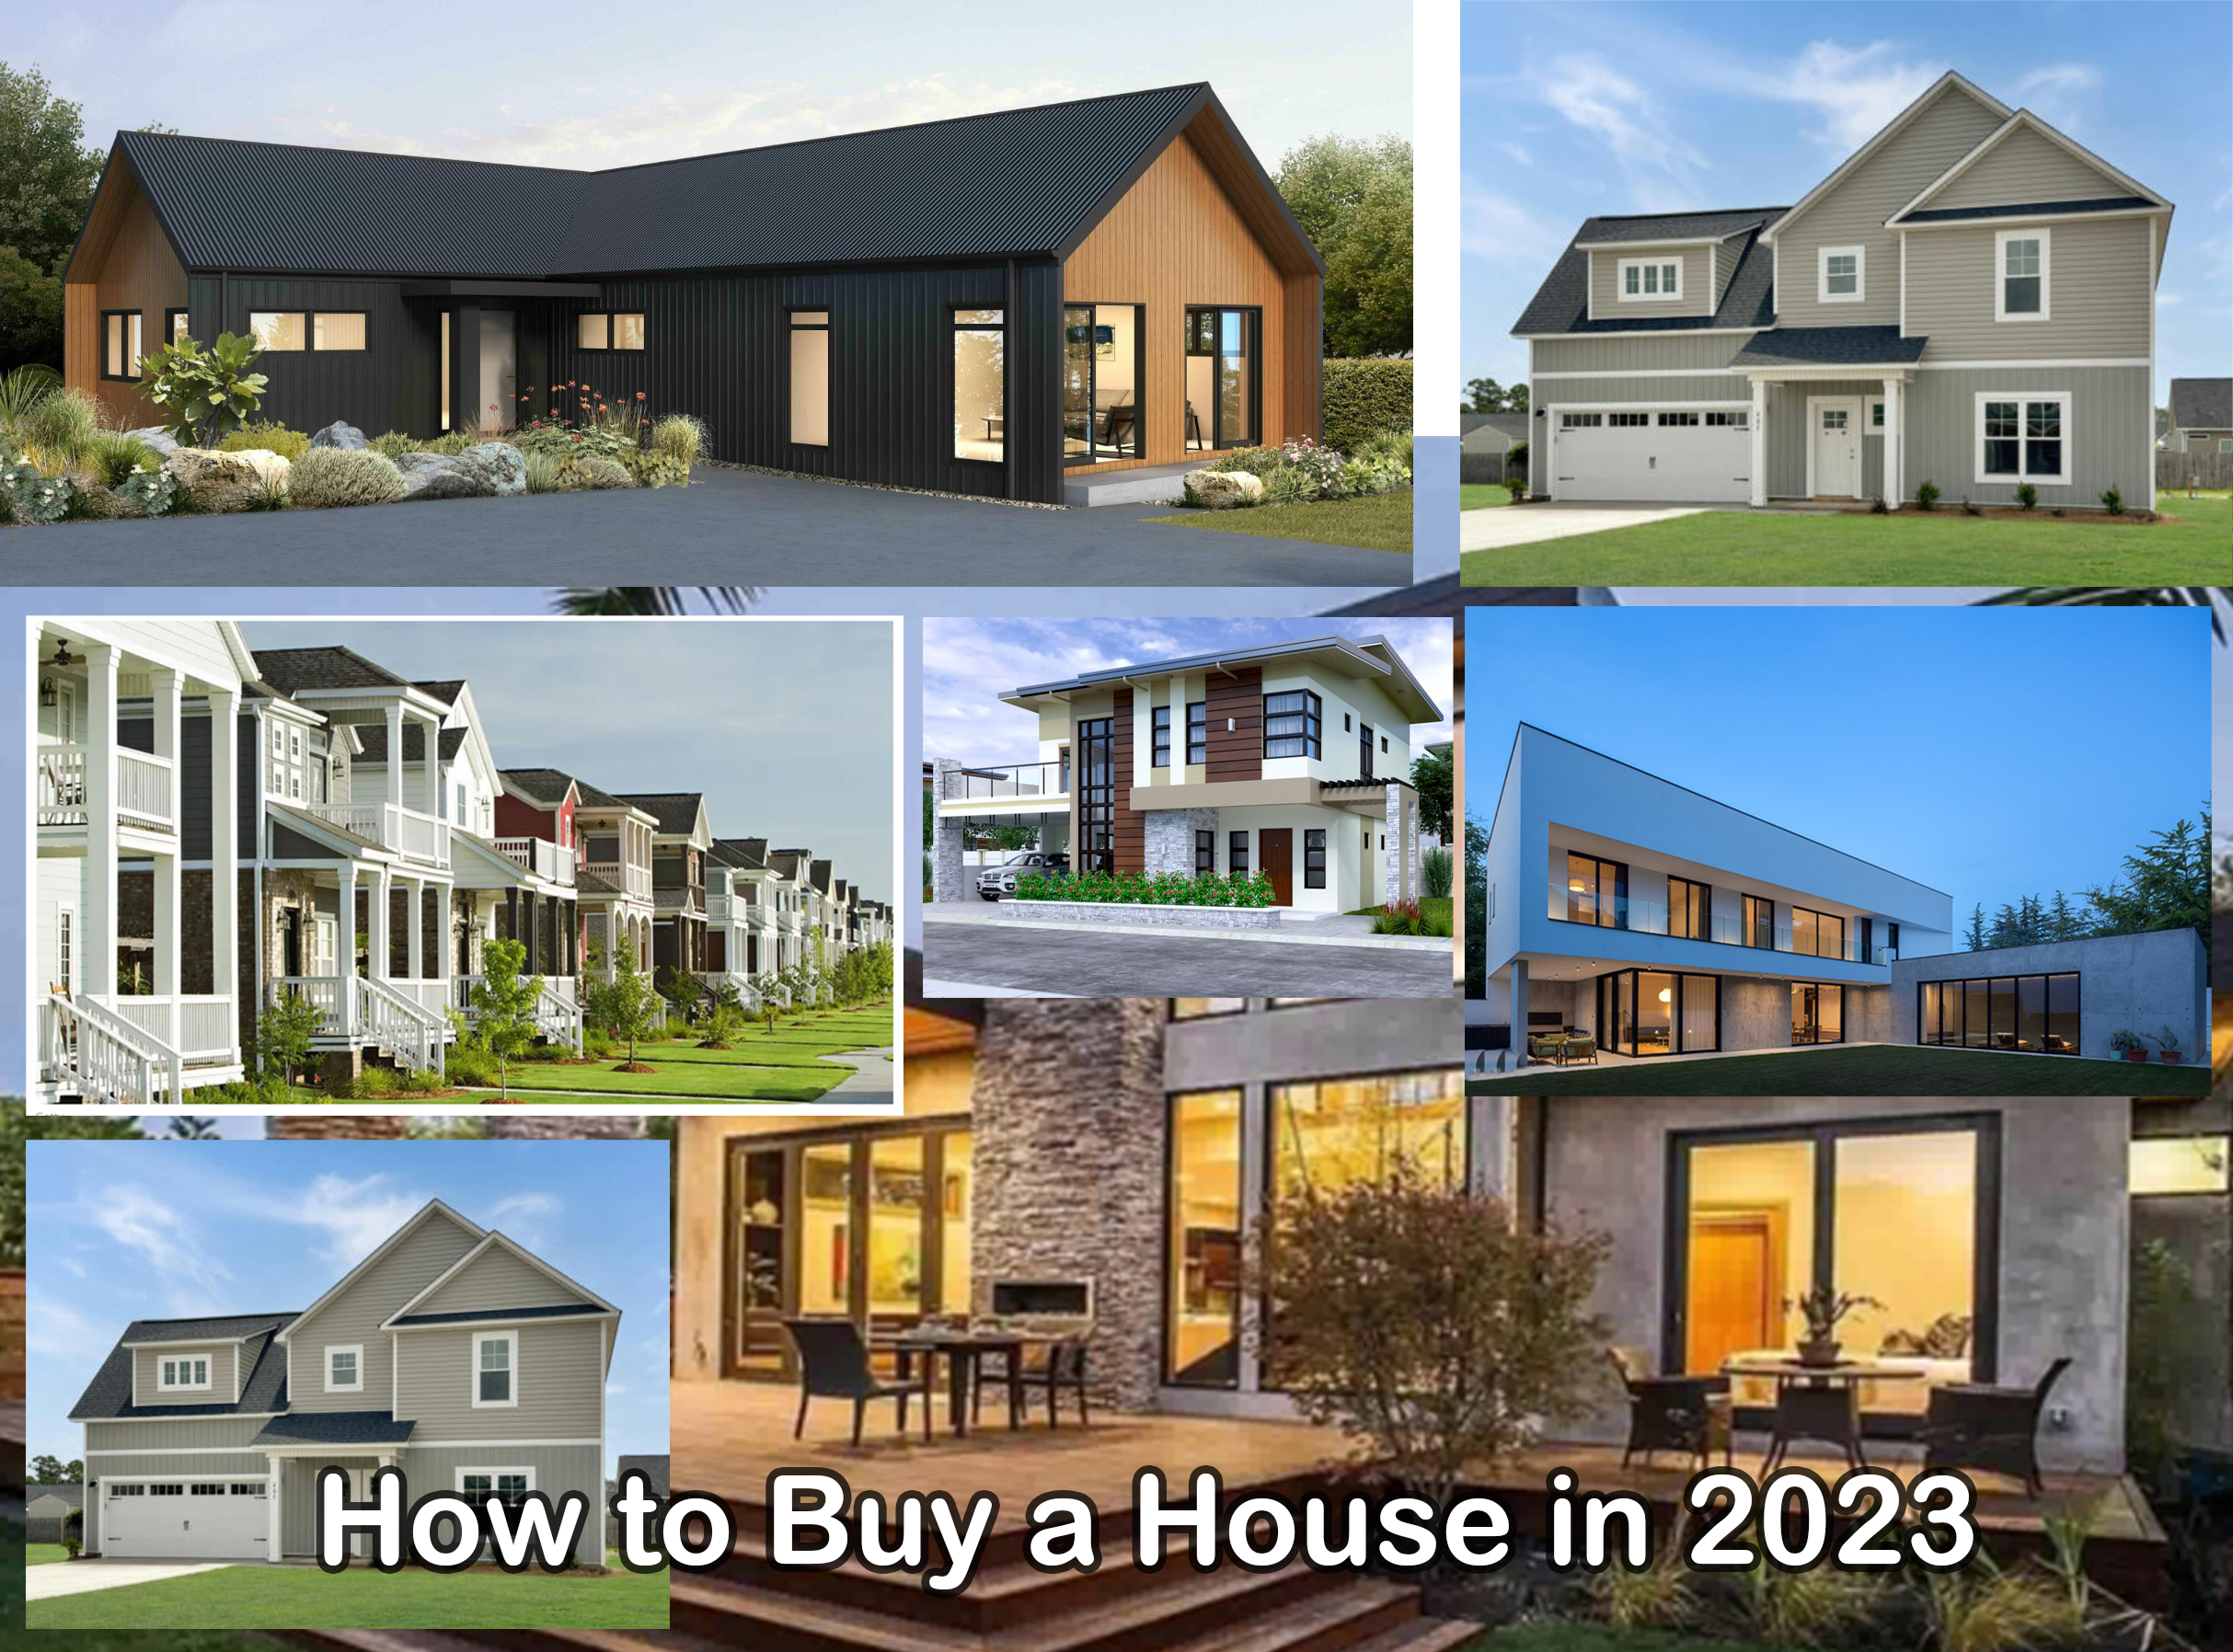 How to Buy a House in 2023